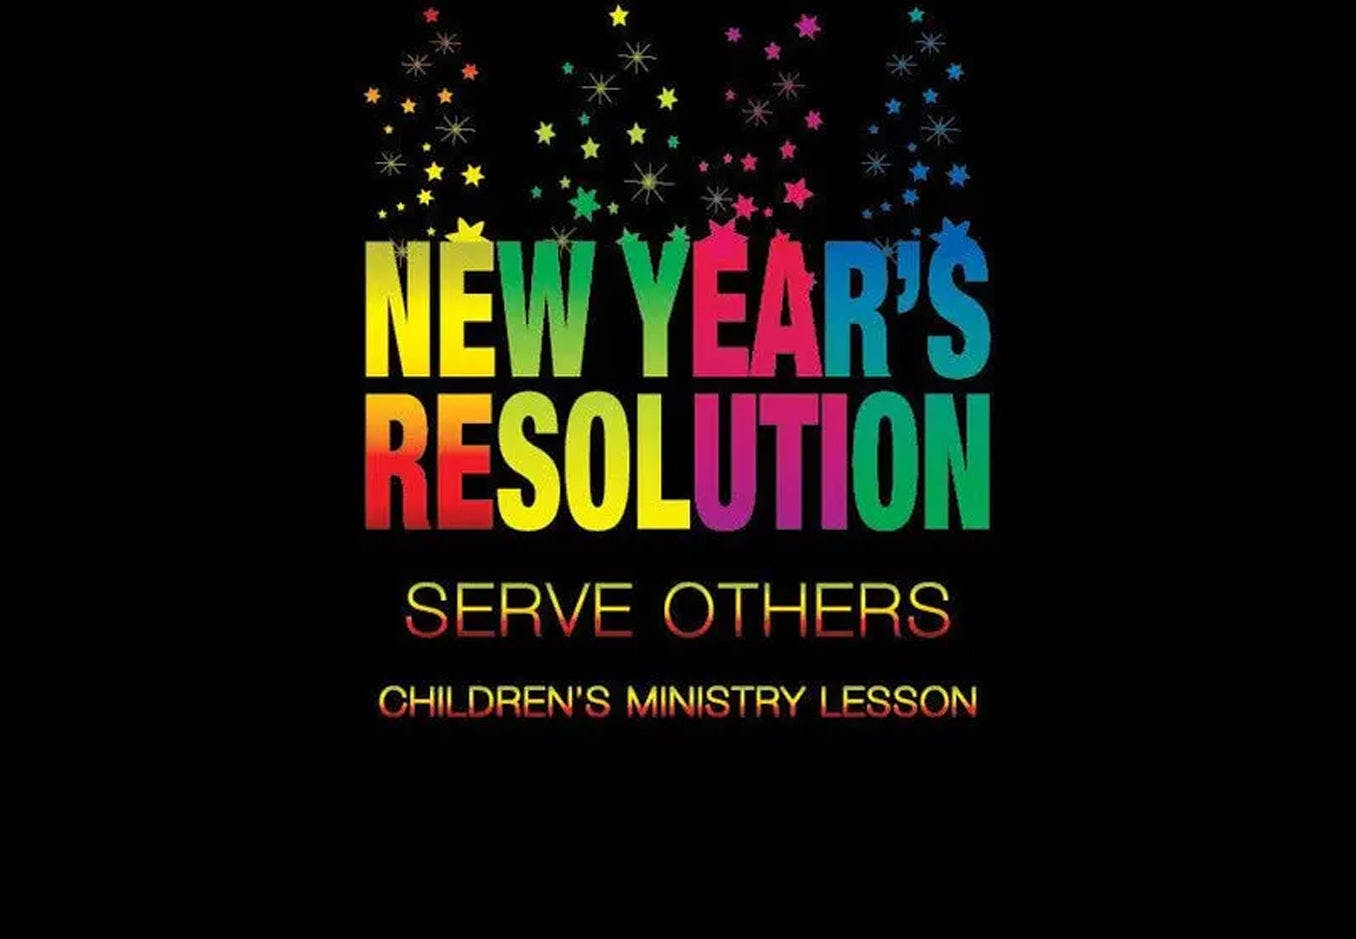 New Year's Resolution Lesson - Serve Others